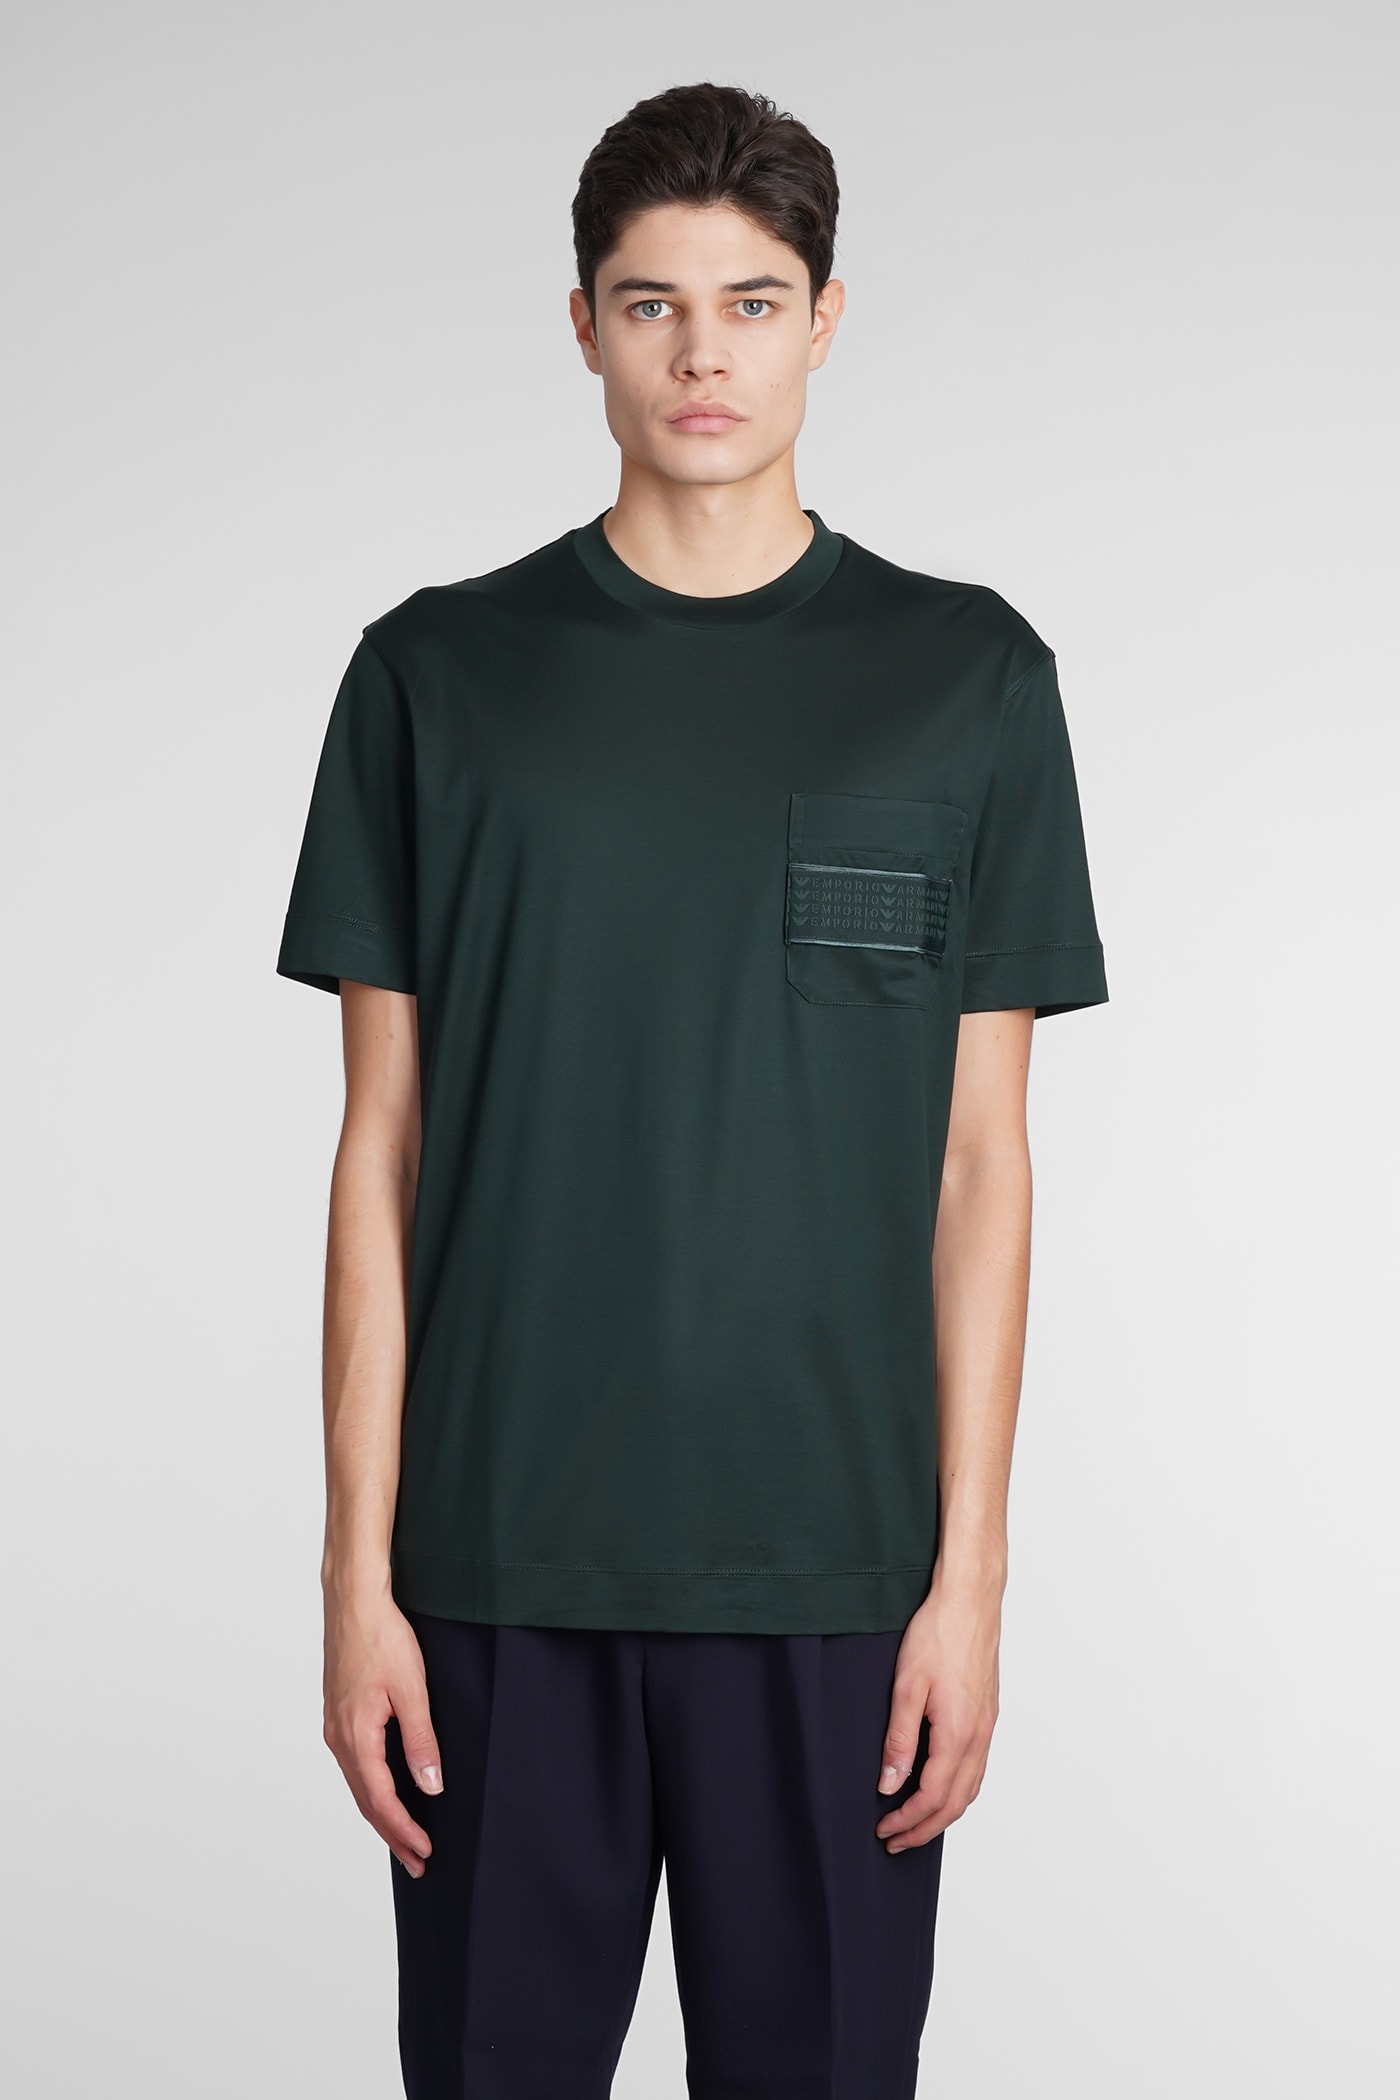 EMPORIO ARMANI T-SHIRT IN GREEN WOOL AND POLYESTER